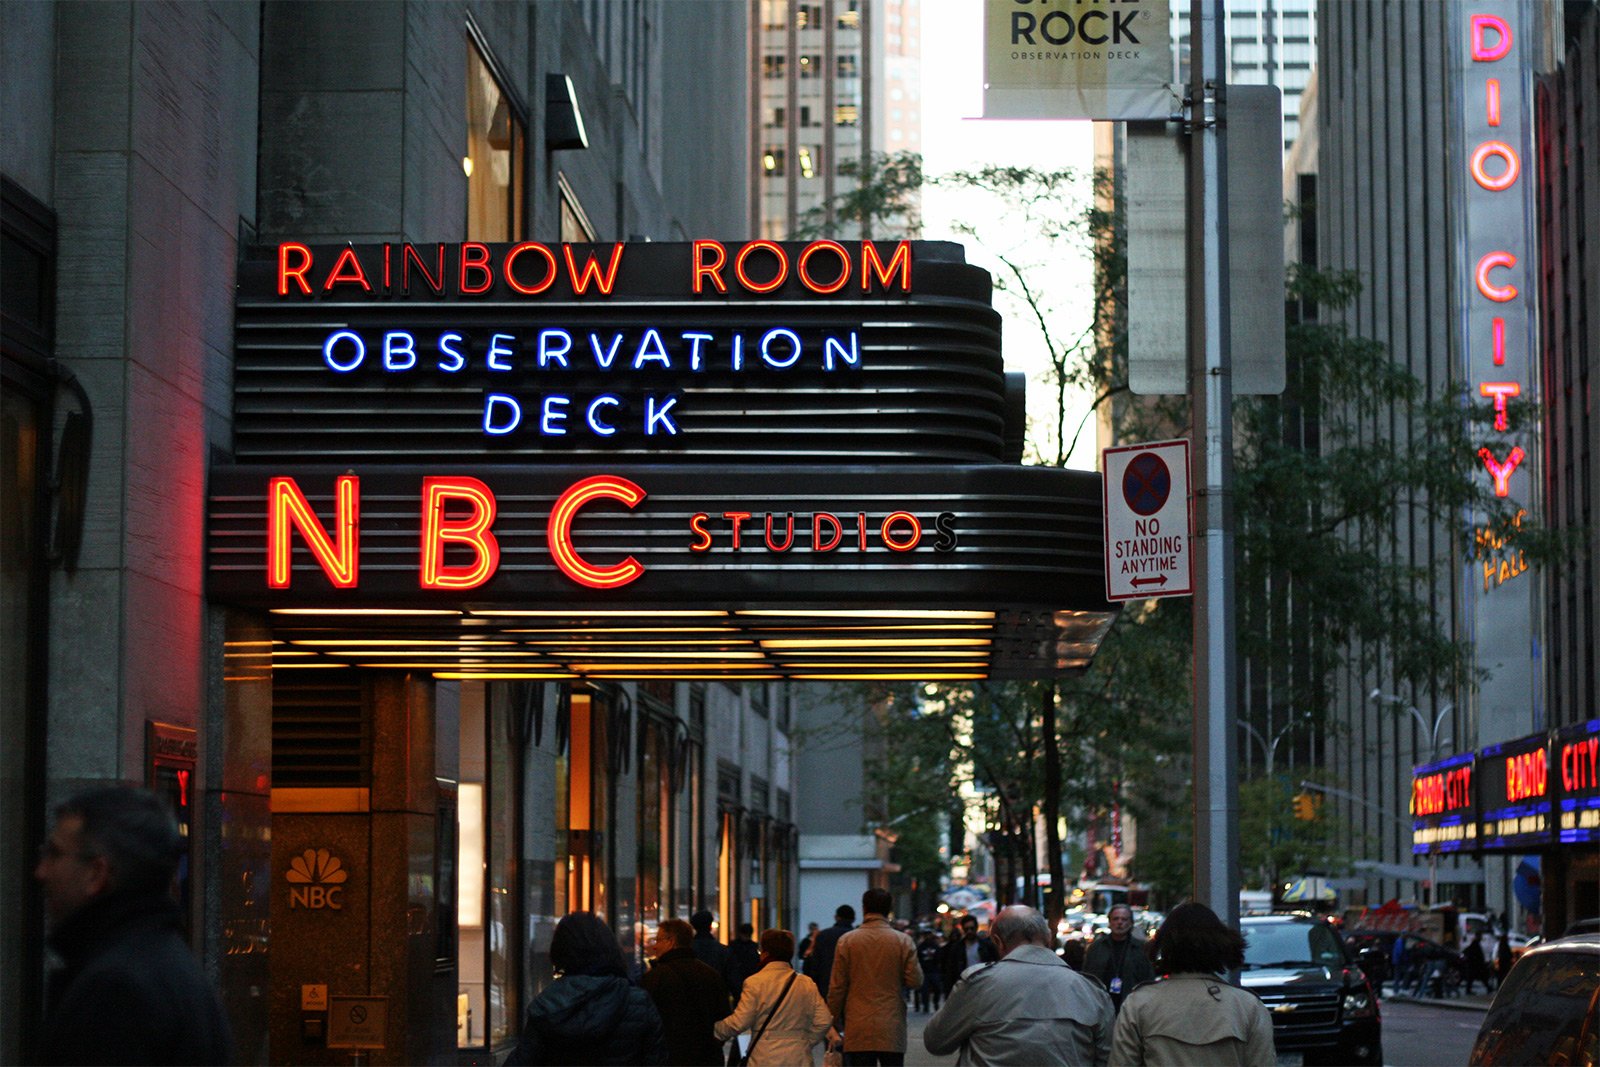 How to see the work of the NBC television network from within in New York